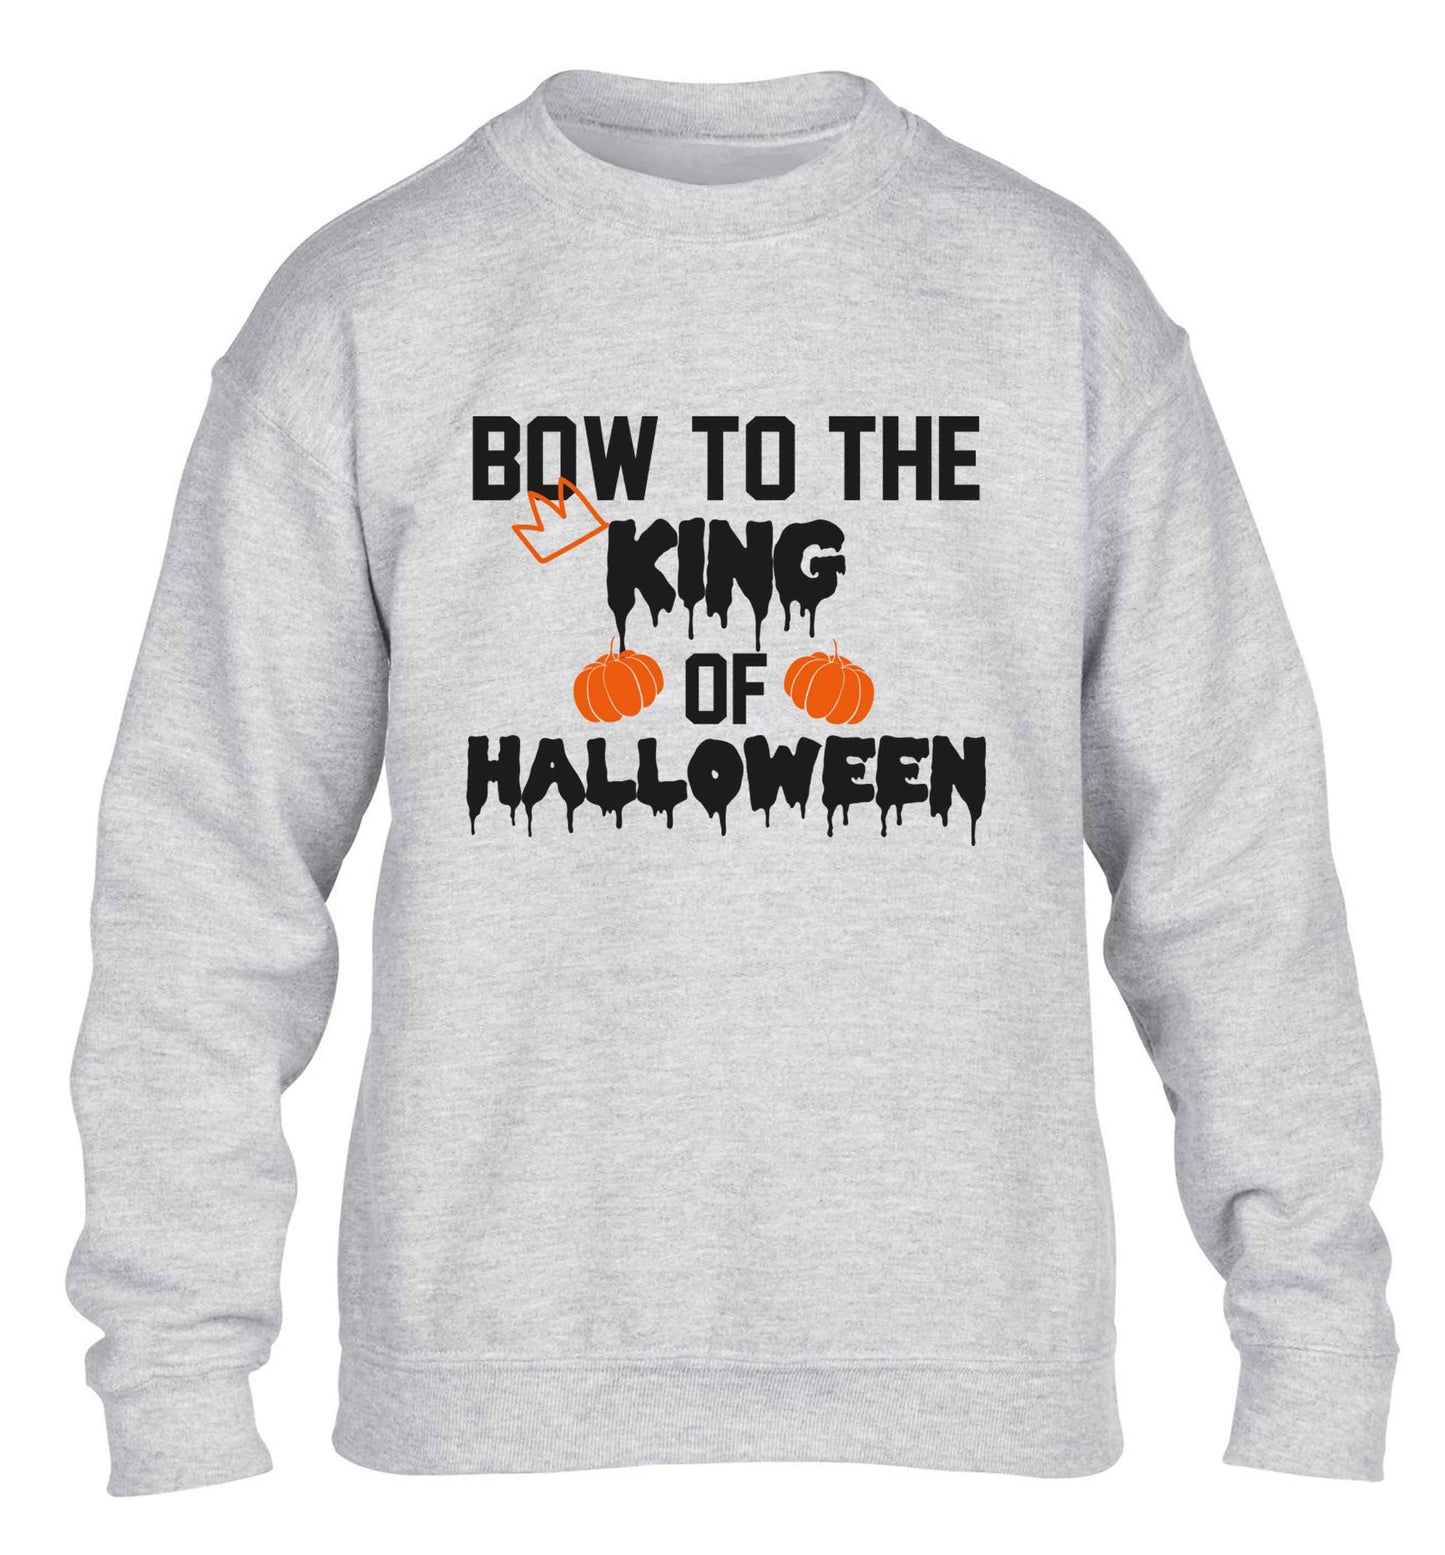 Bow to the King of halloween children's grey sweater 12-13 Years